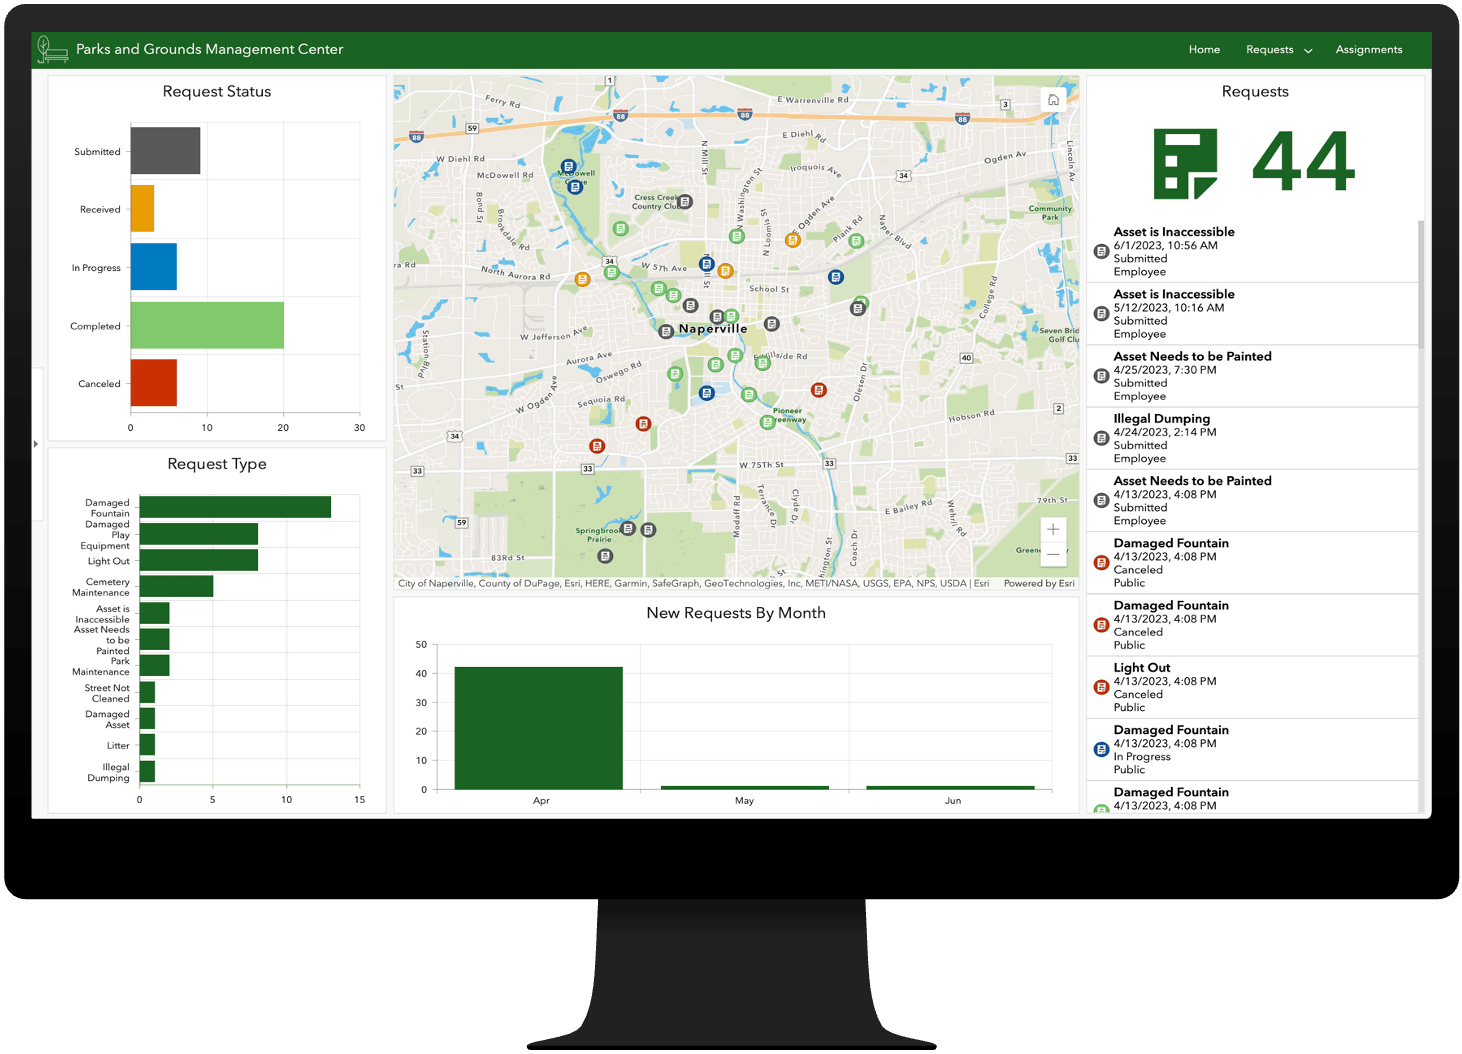 Parks and Grounds Management Center, request dashboard.